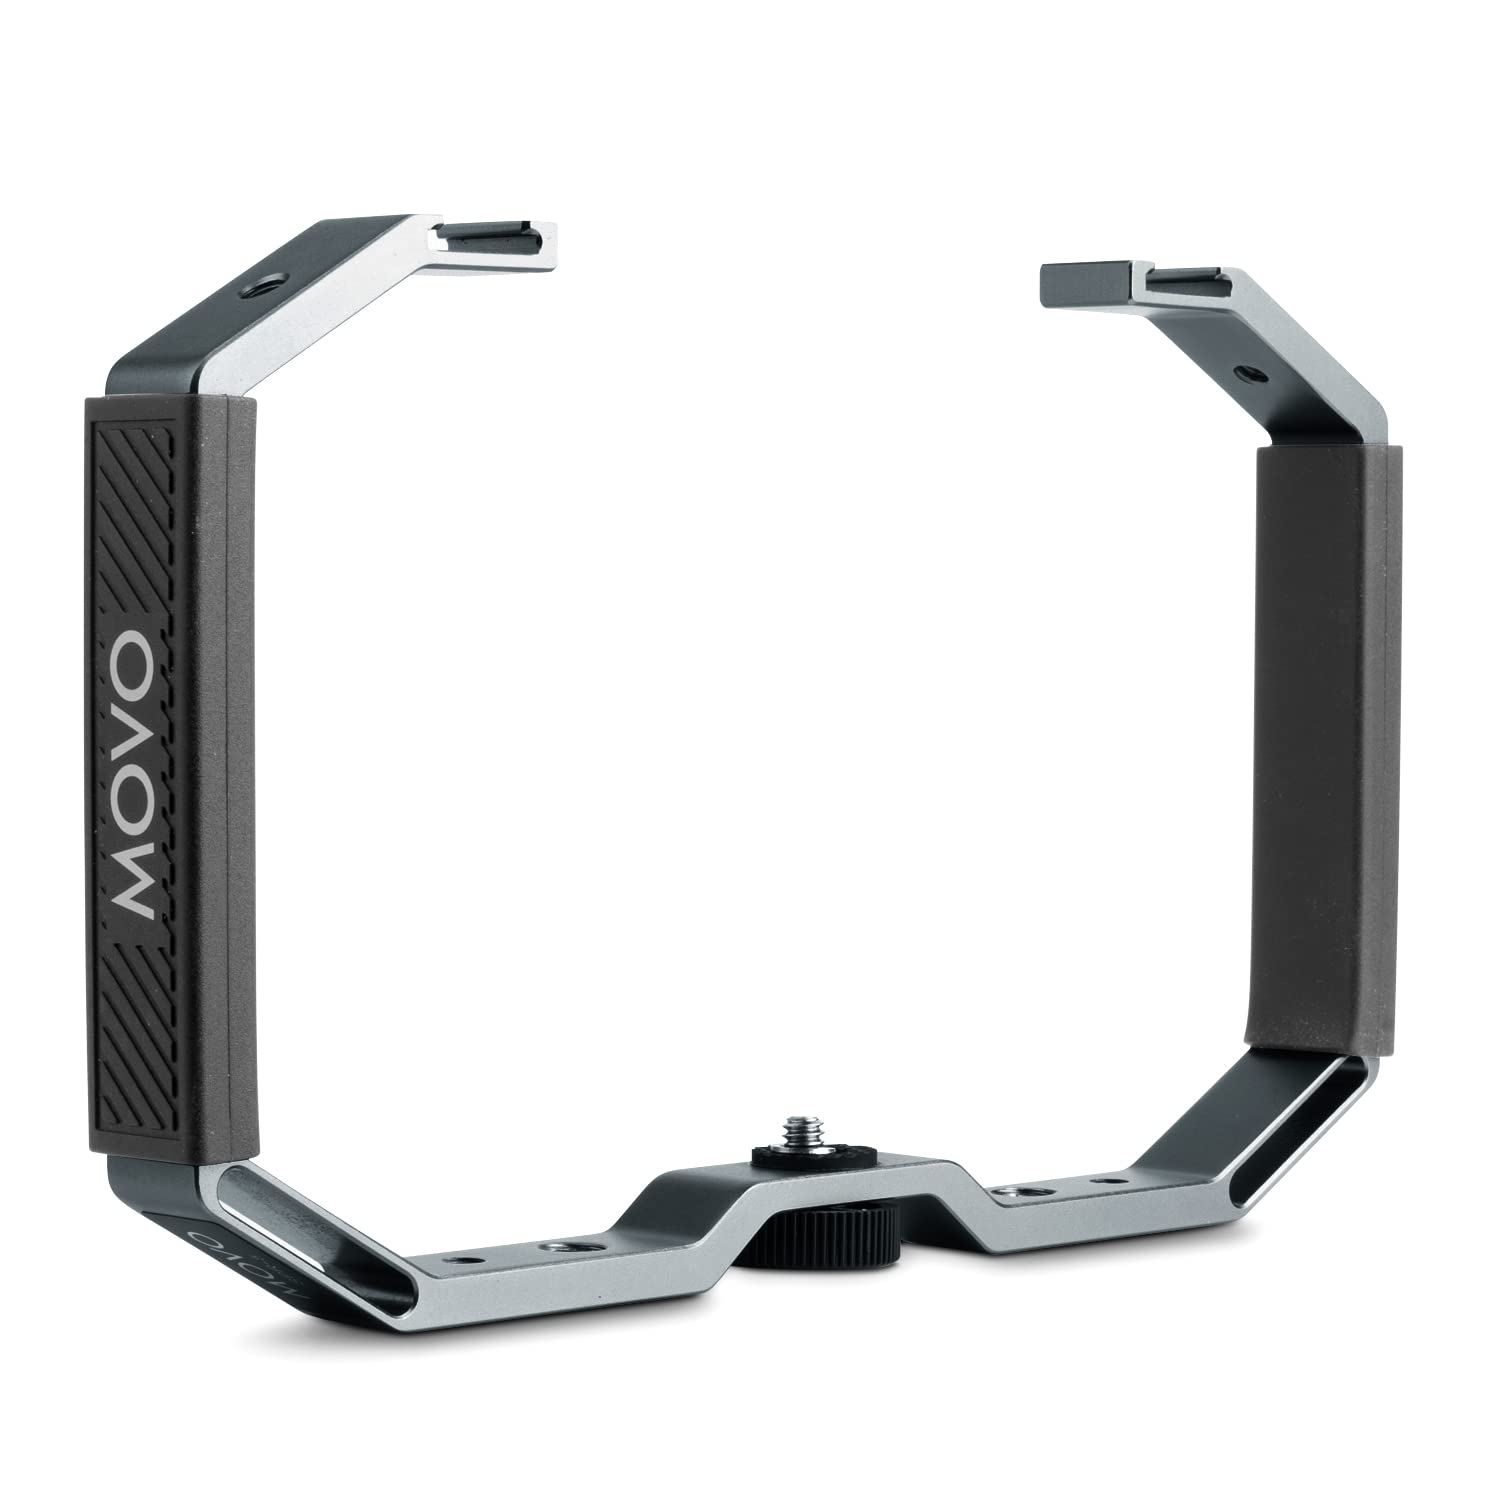 Movo SPR/CR-5 Metal Cage Rig Stabilizer for Mirrorless Camera, DSLR, Smartphone - Dual-Grip Handheld Camera Rig - Two Hand Stabilizer for Video and Film Shoots, Sports Videography, Vlogging, and More  - Like New